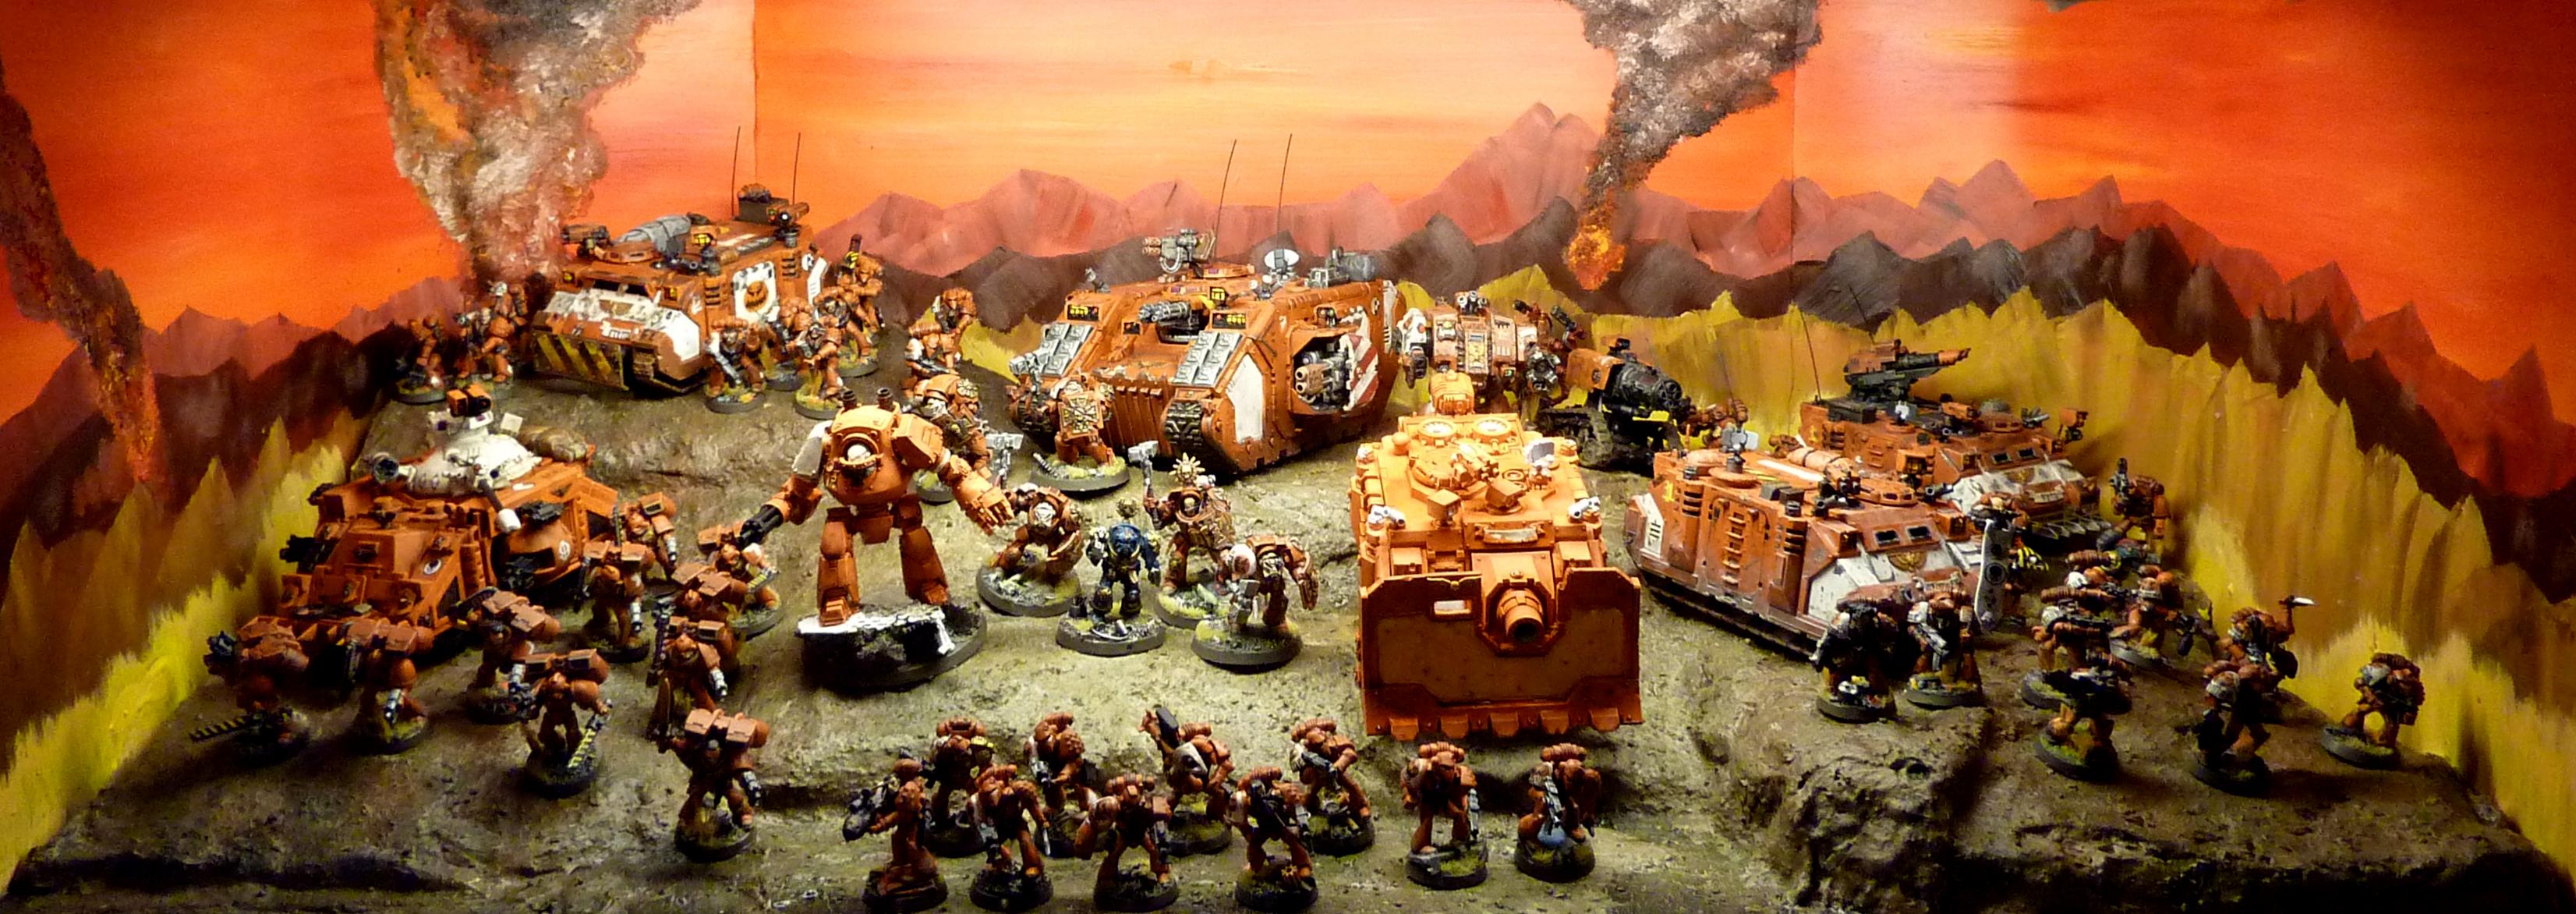 Armies On Parade, Group, Space Marines, Warhammer 40,000